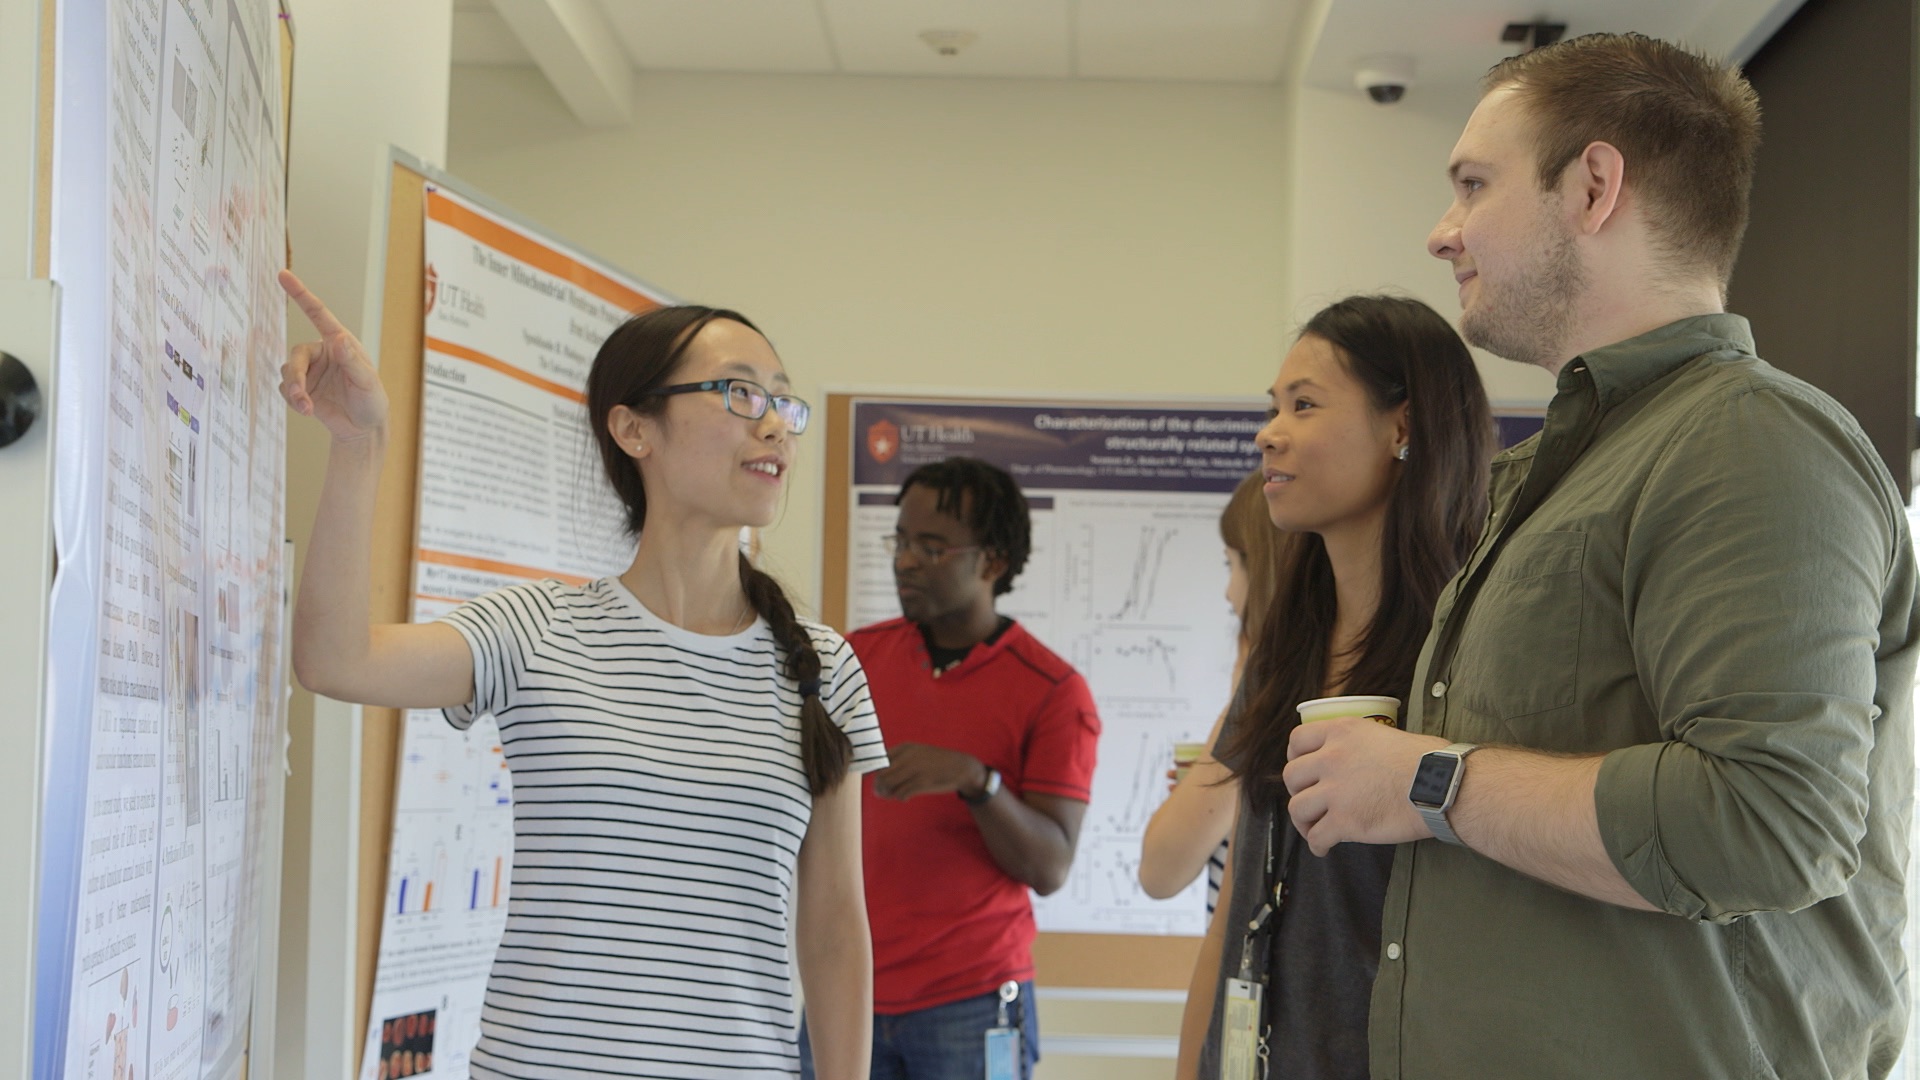 Student showing people her research poster